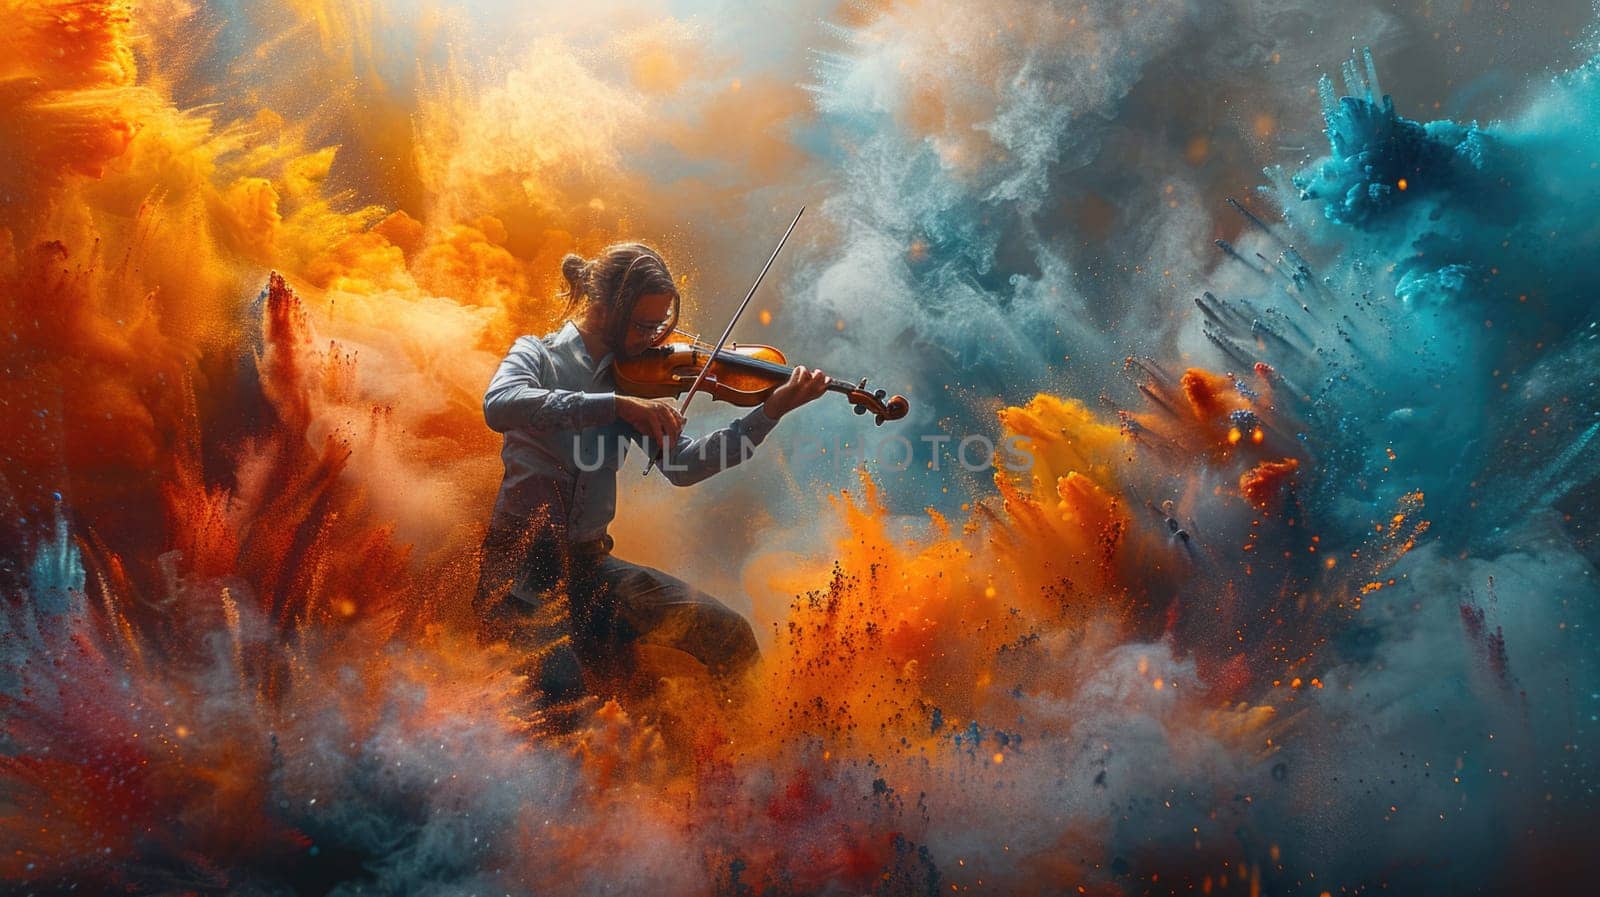 A detailed depiction of a man passionately playing the violin in a dynamic painting.